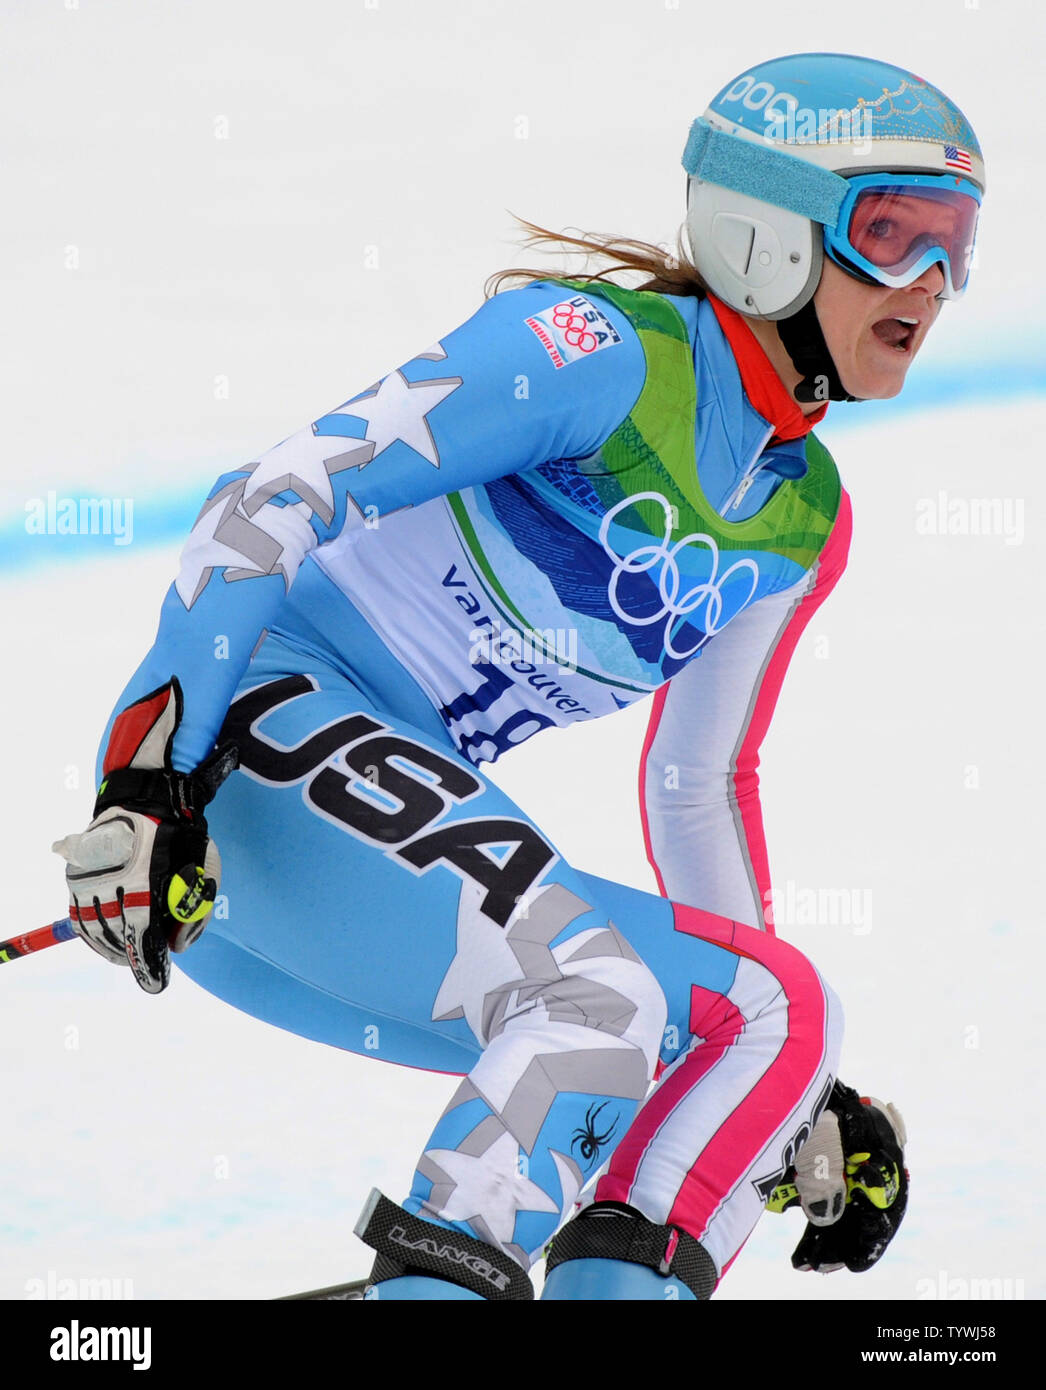 A dejected USA's Julia Mancuso looks at her slow time after the first run of the Women's Giant Slalom at Whistler Creekside at the Winter Olympics on February 24, 2010.  Mancuso had to restart after teammate Lindsey Vonn fell on the course.       UPI/Pat Benic Stock Photo